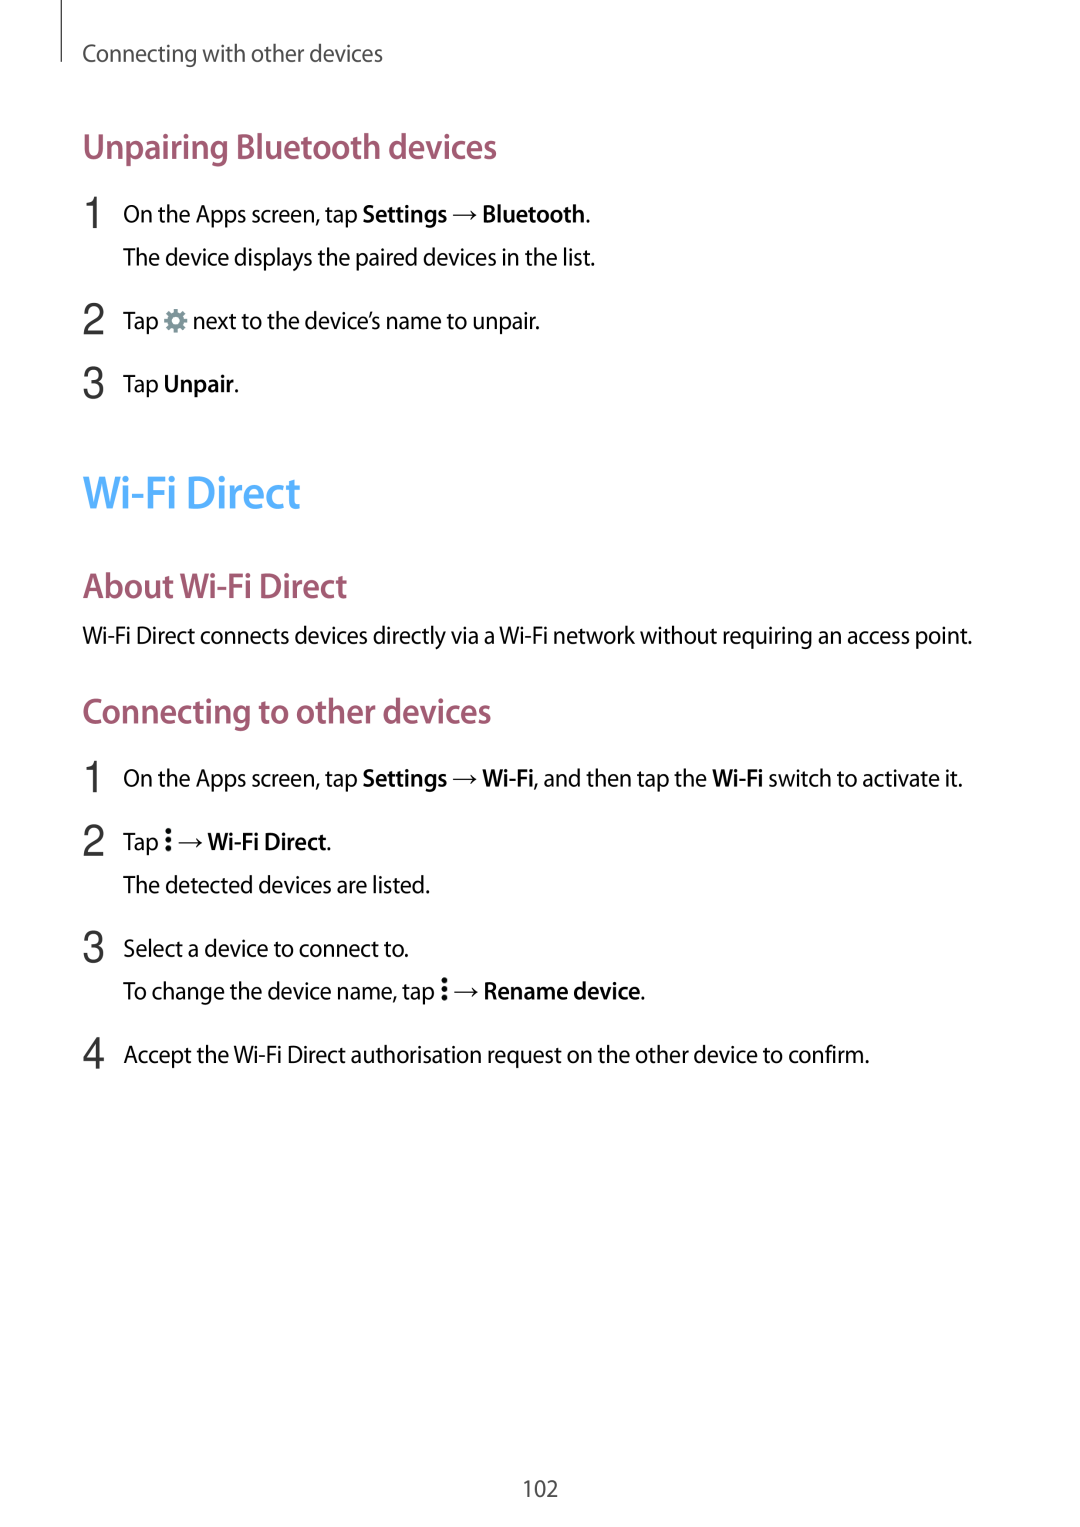 Samsung SM-A700FZWDKSA manual Unpairing Bluetooth devices, About Wi-Fi Direct, Connecting to other devices, Tap Unpair 